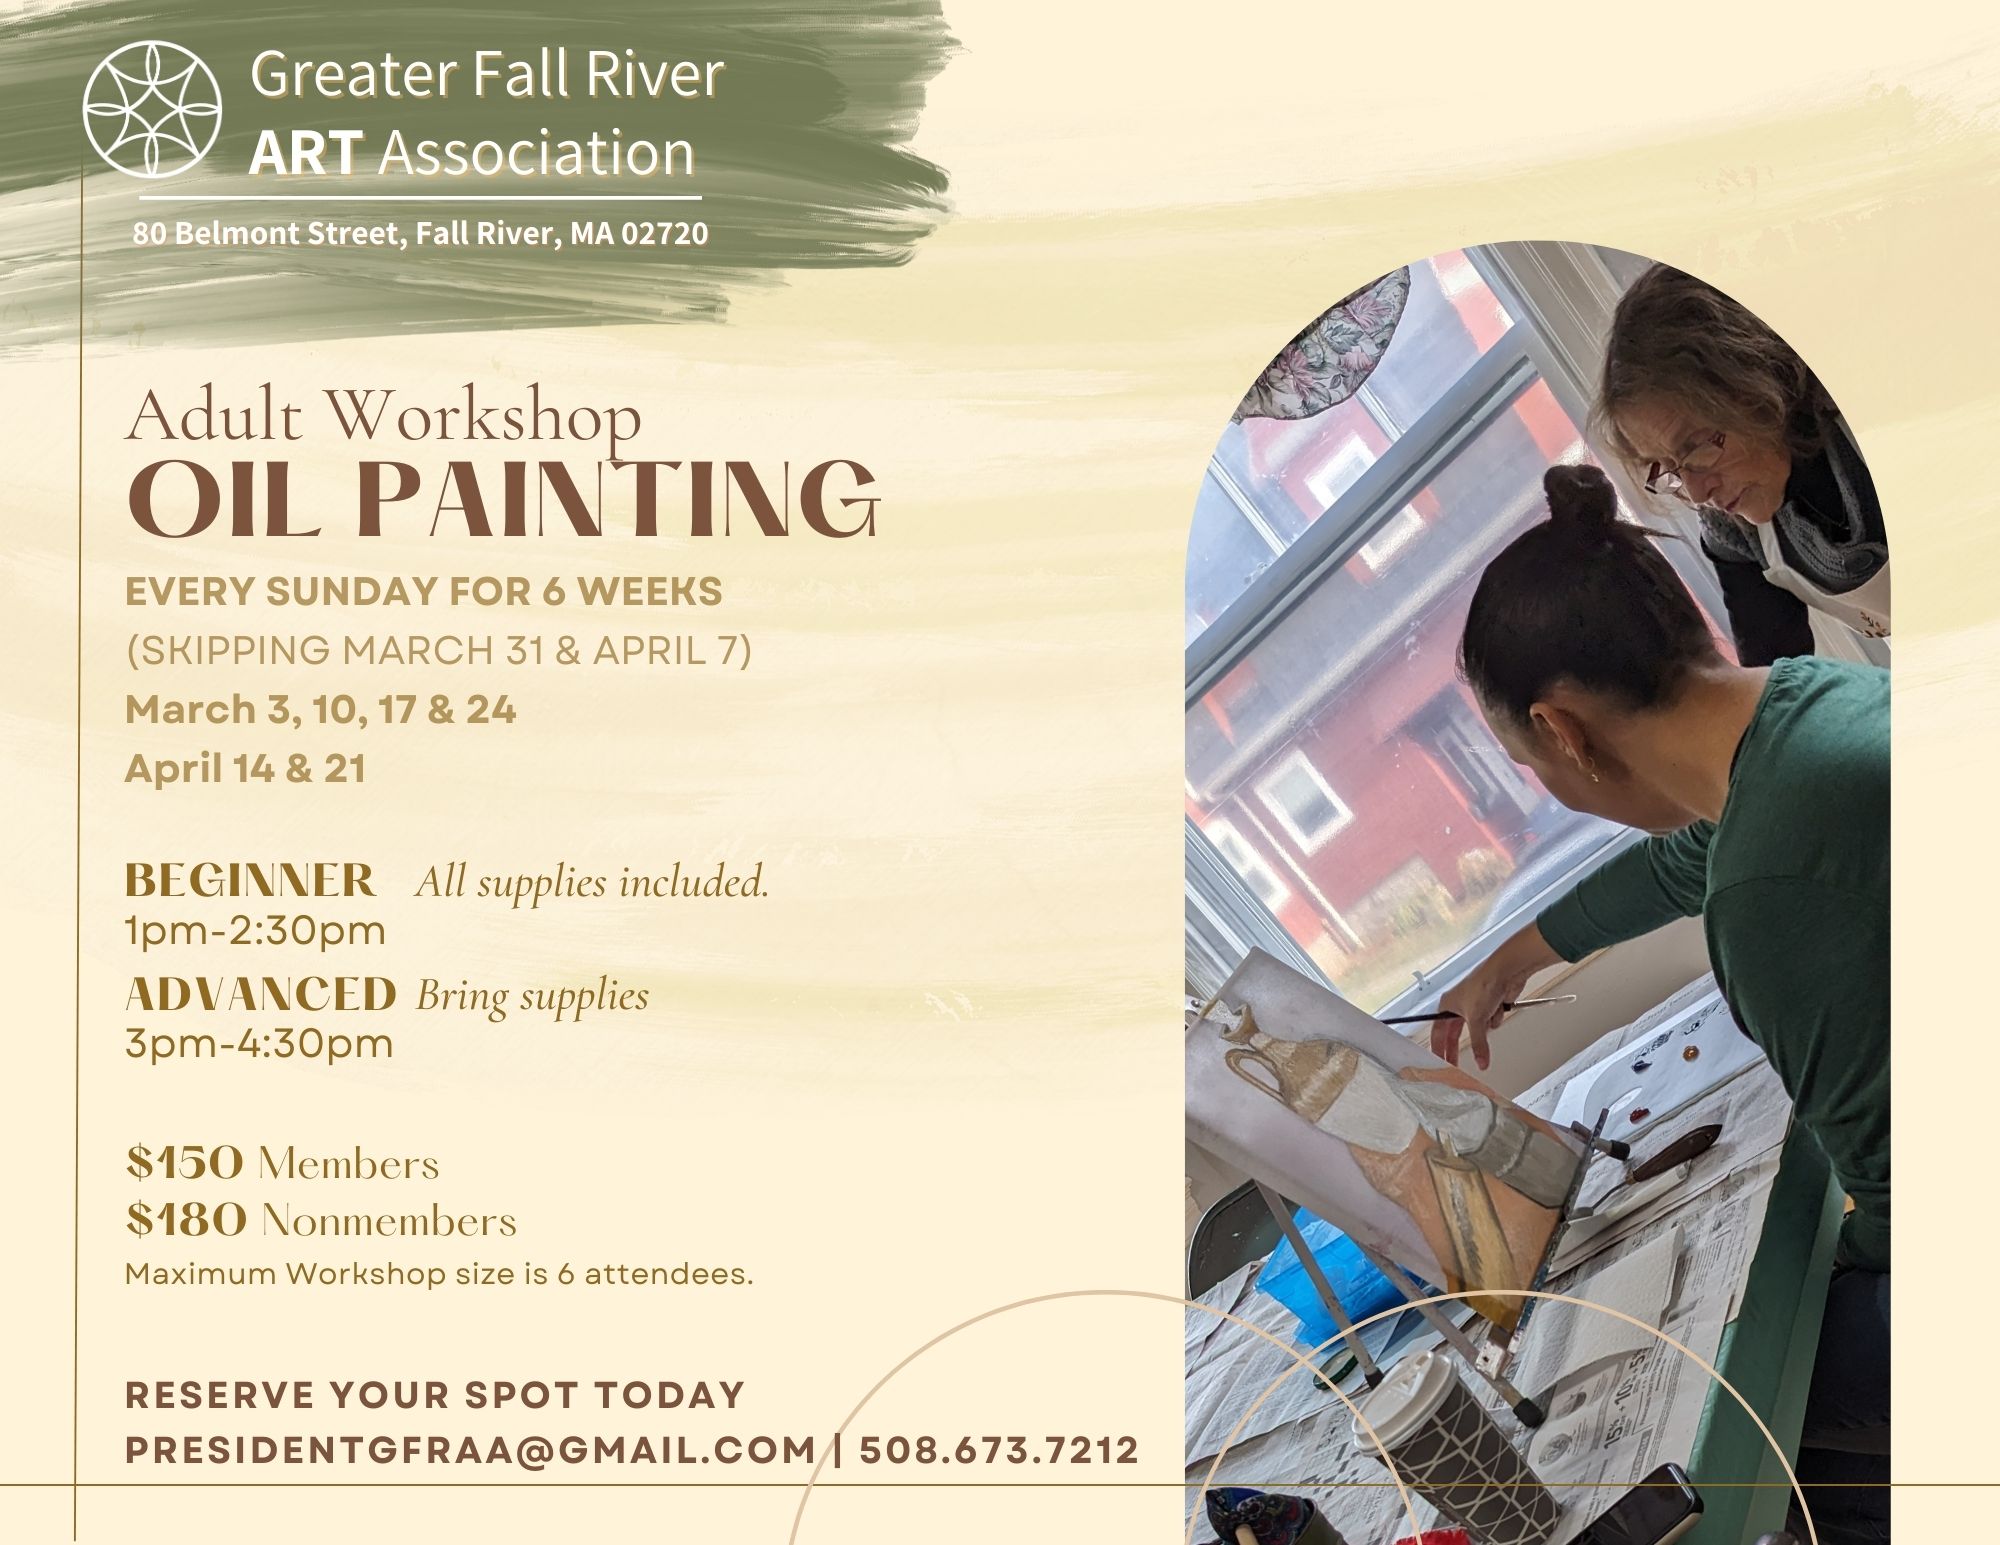 Times and Dates for Adult Oil Painting Workshops